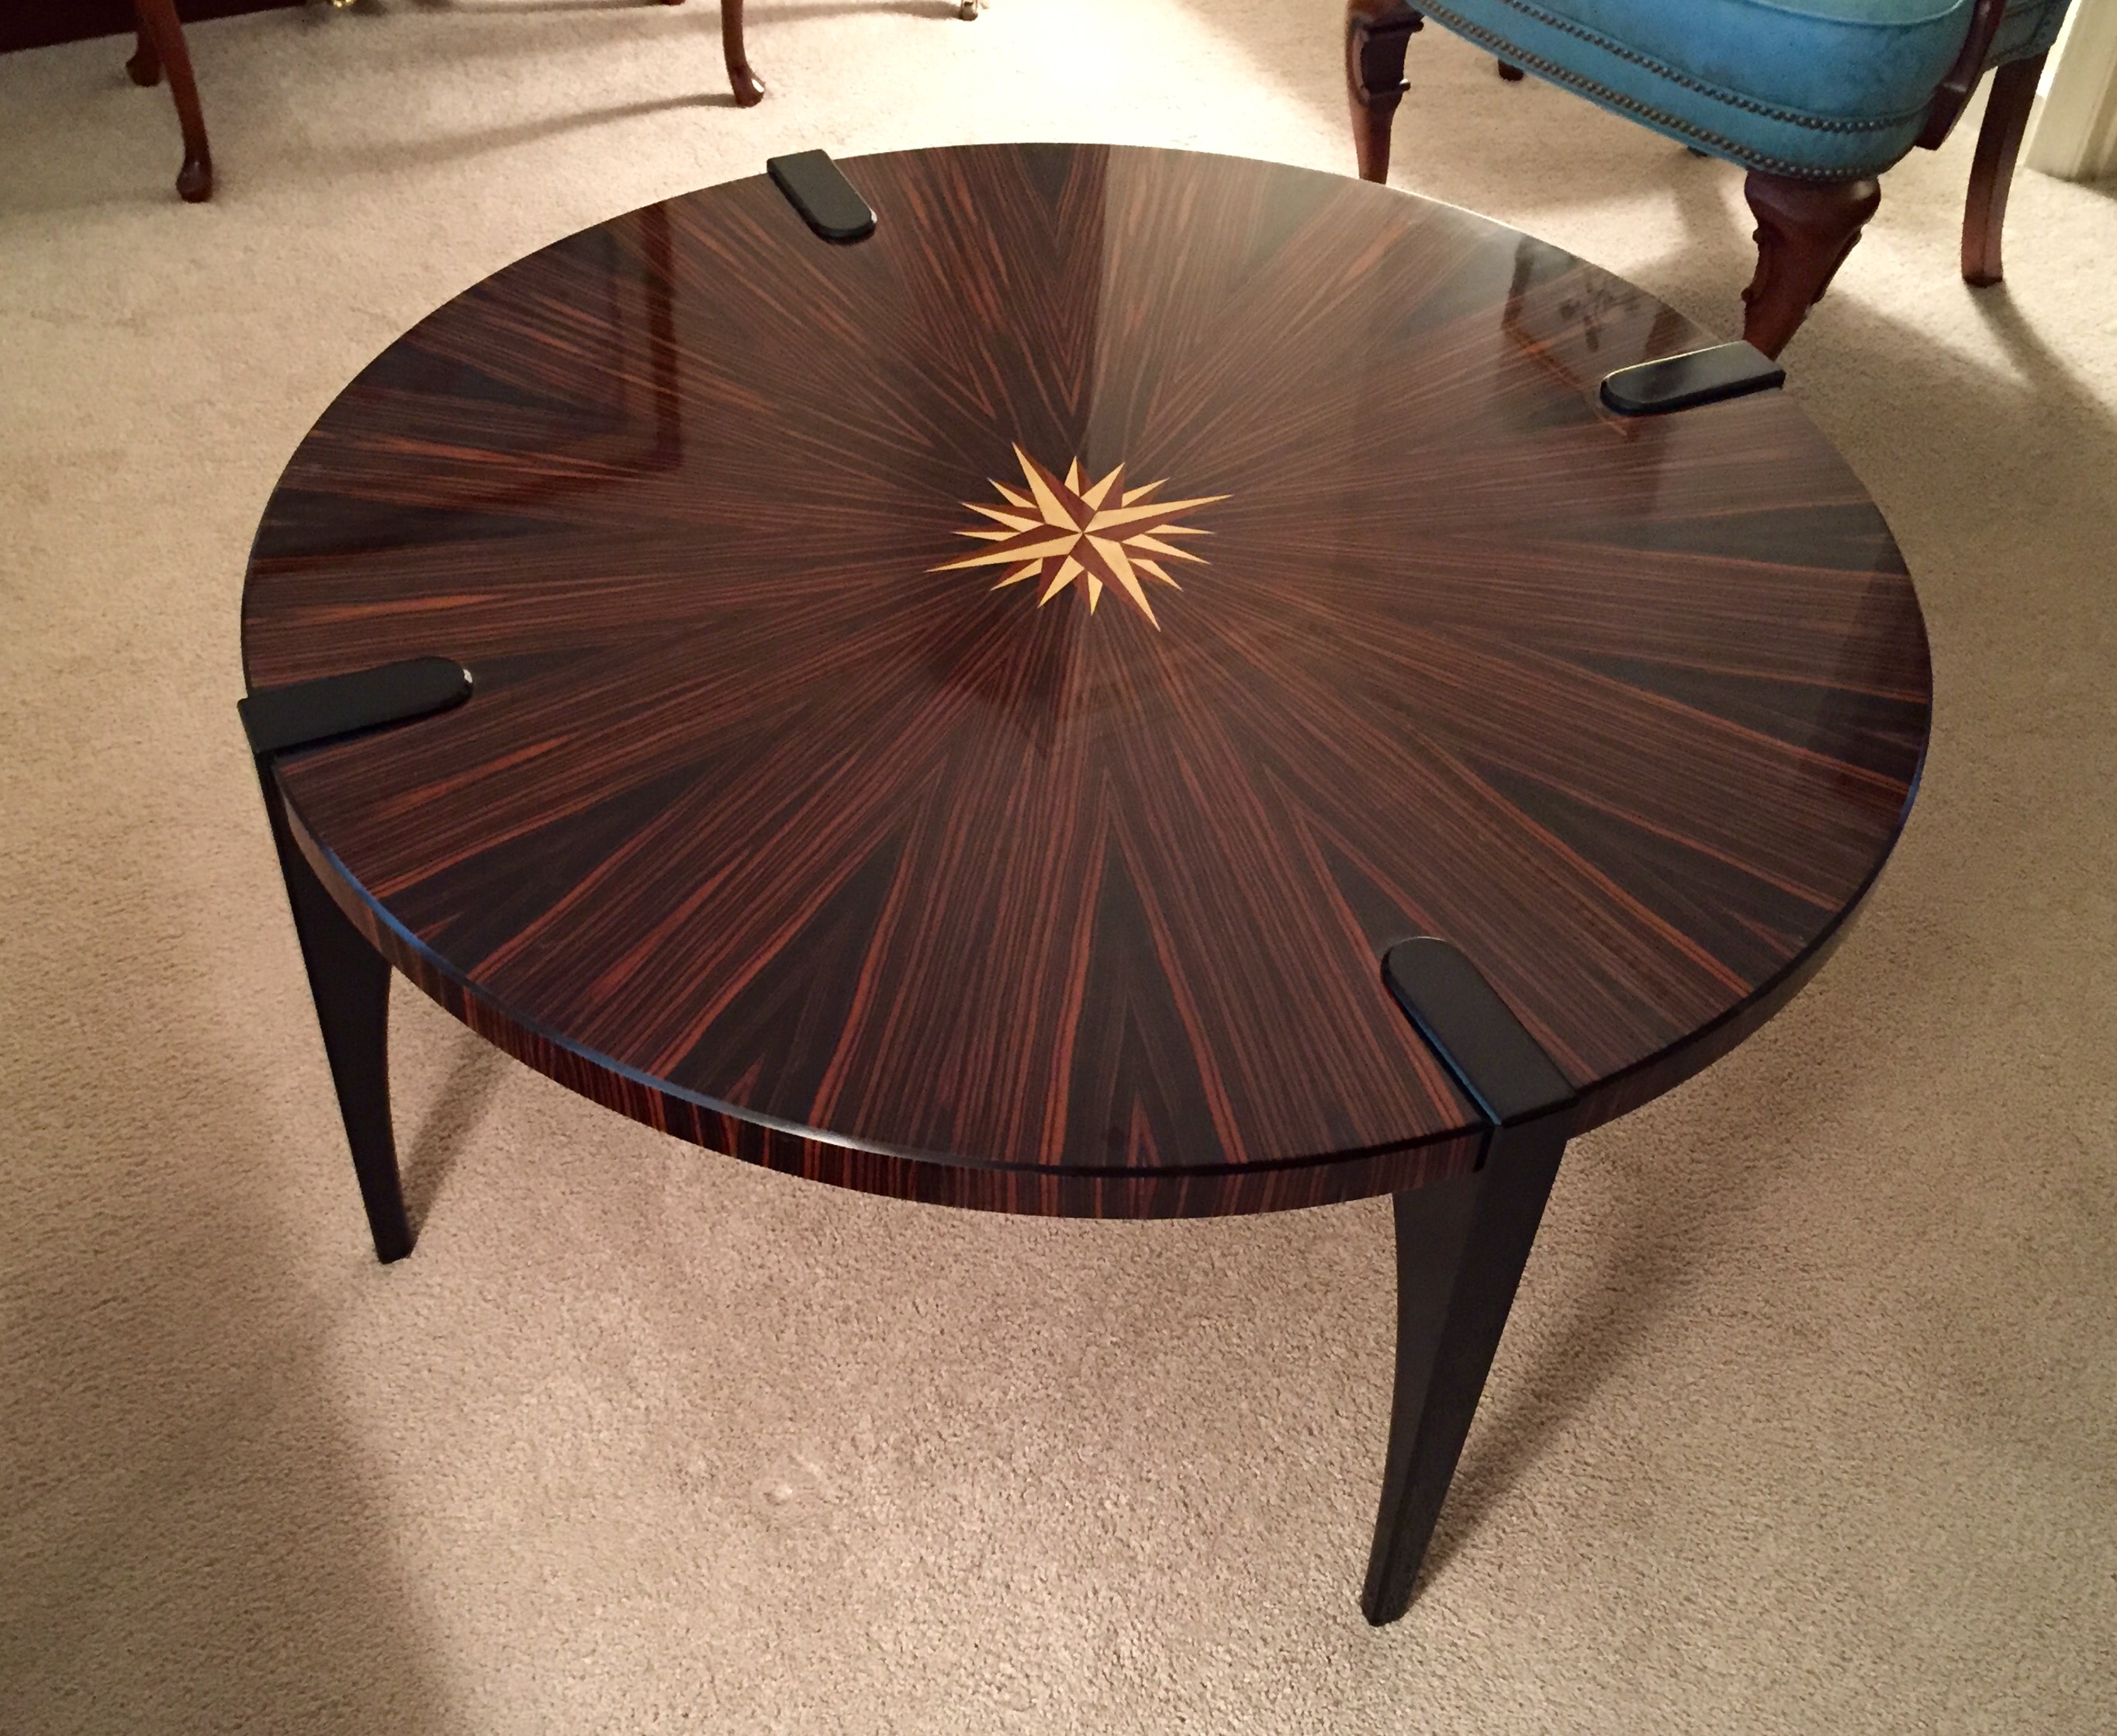 Compass Rose Coffee Table | General Finishes 2018 Design Challenge